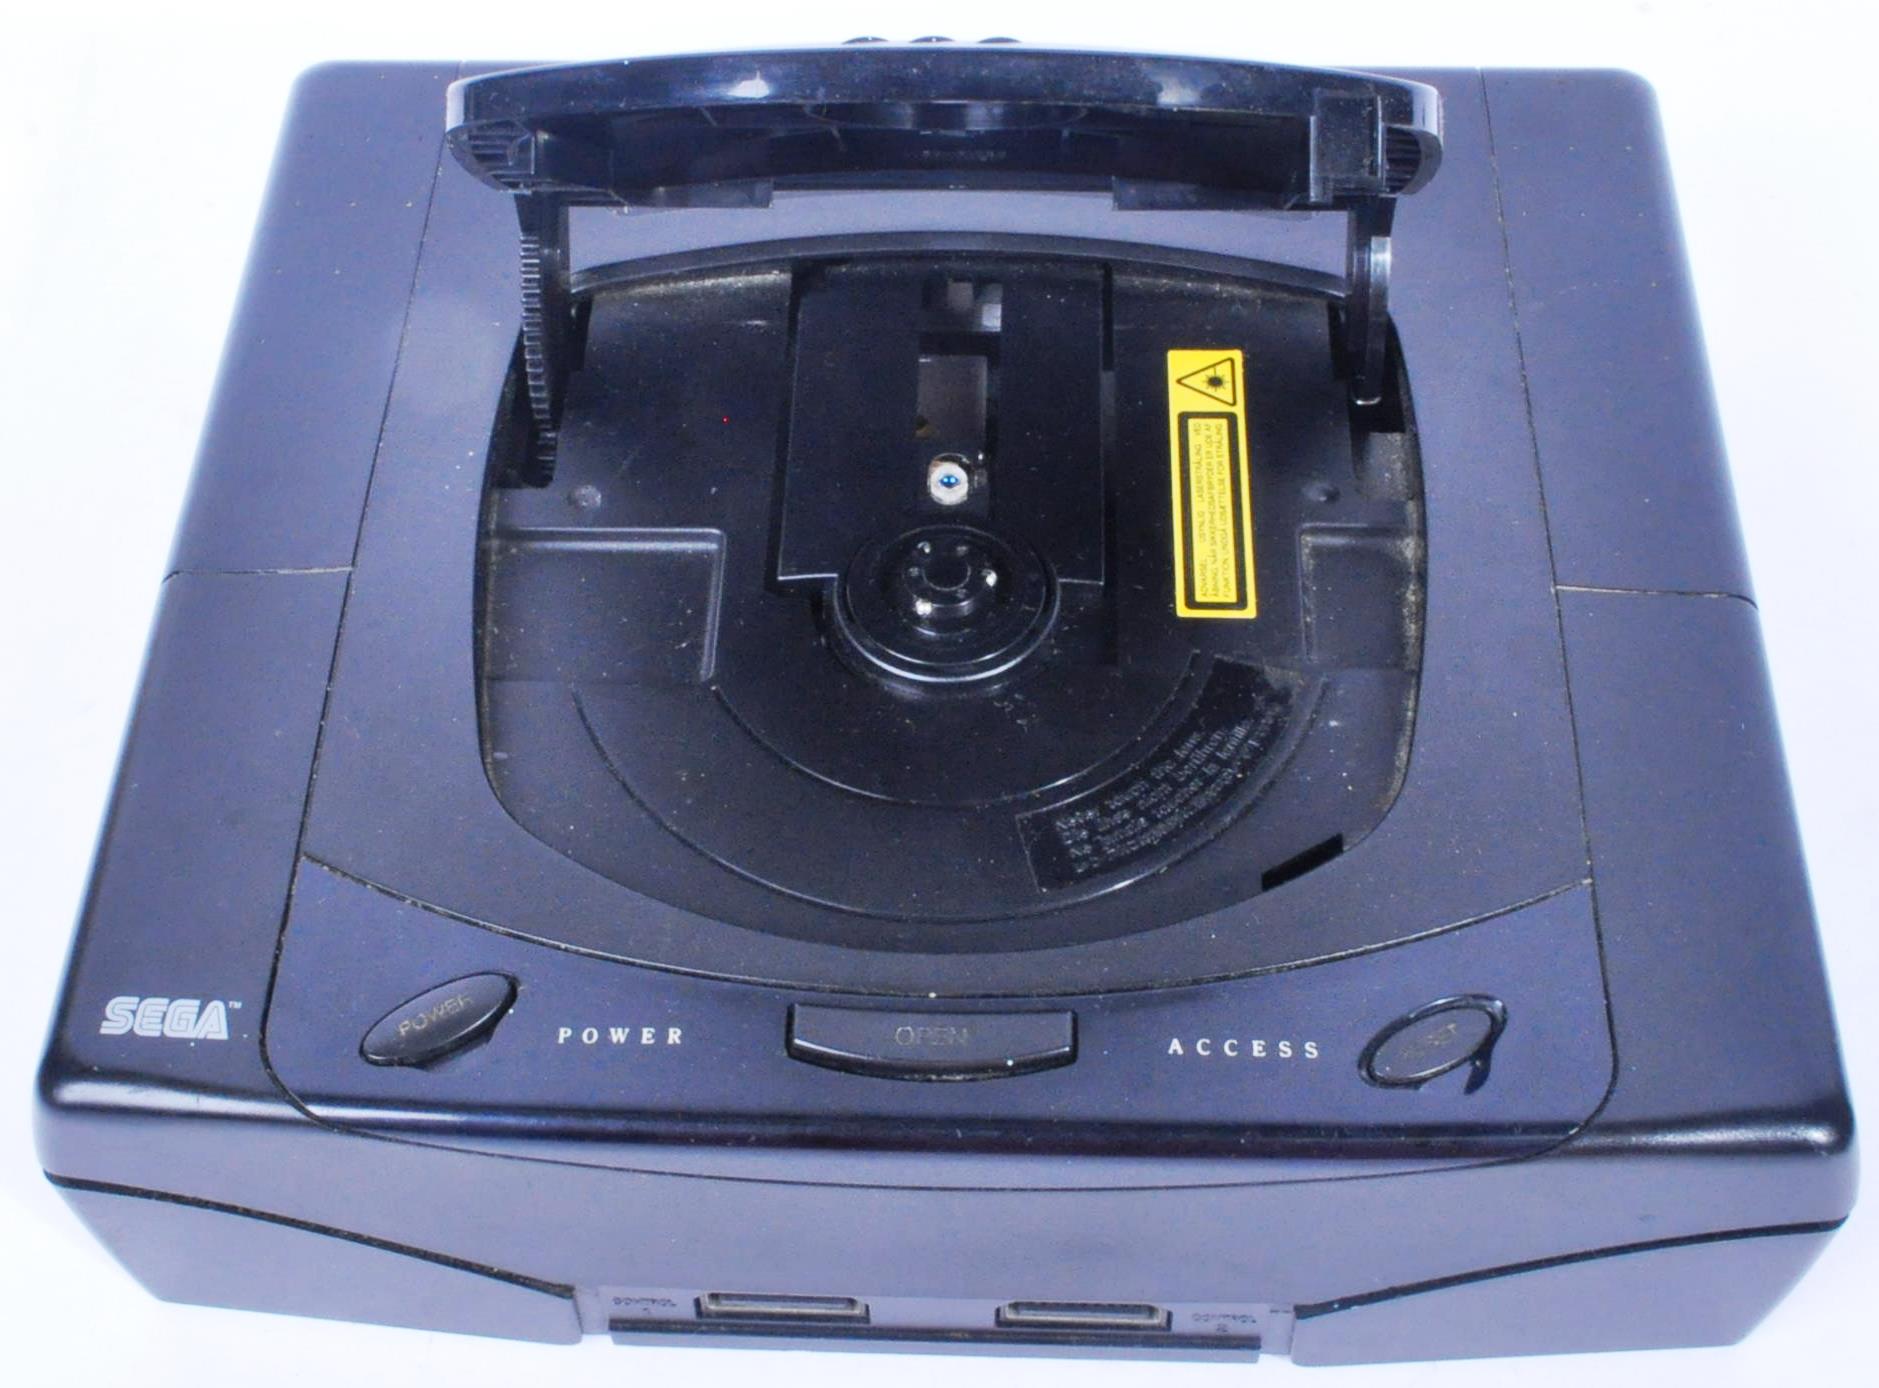 ORIGINAL SEGA SATURN GAMES CONSOLE WITH GAMES AND ACCESSORIES - Image 3 of 10